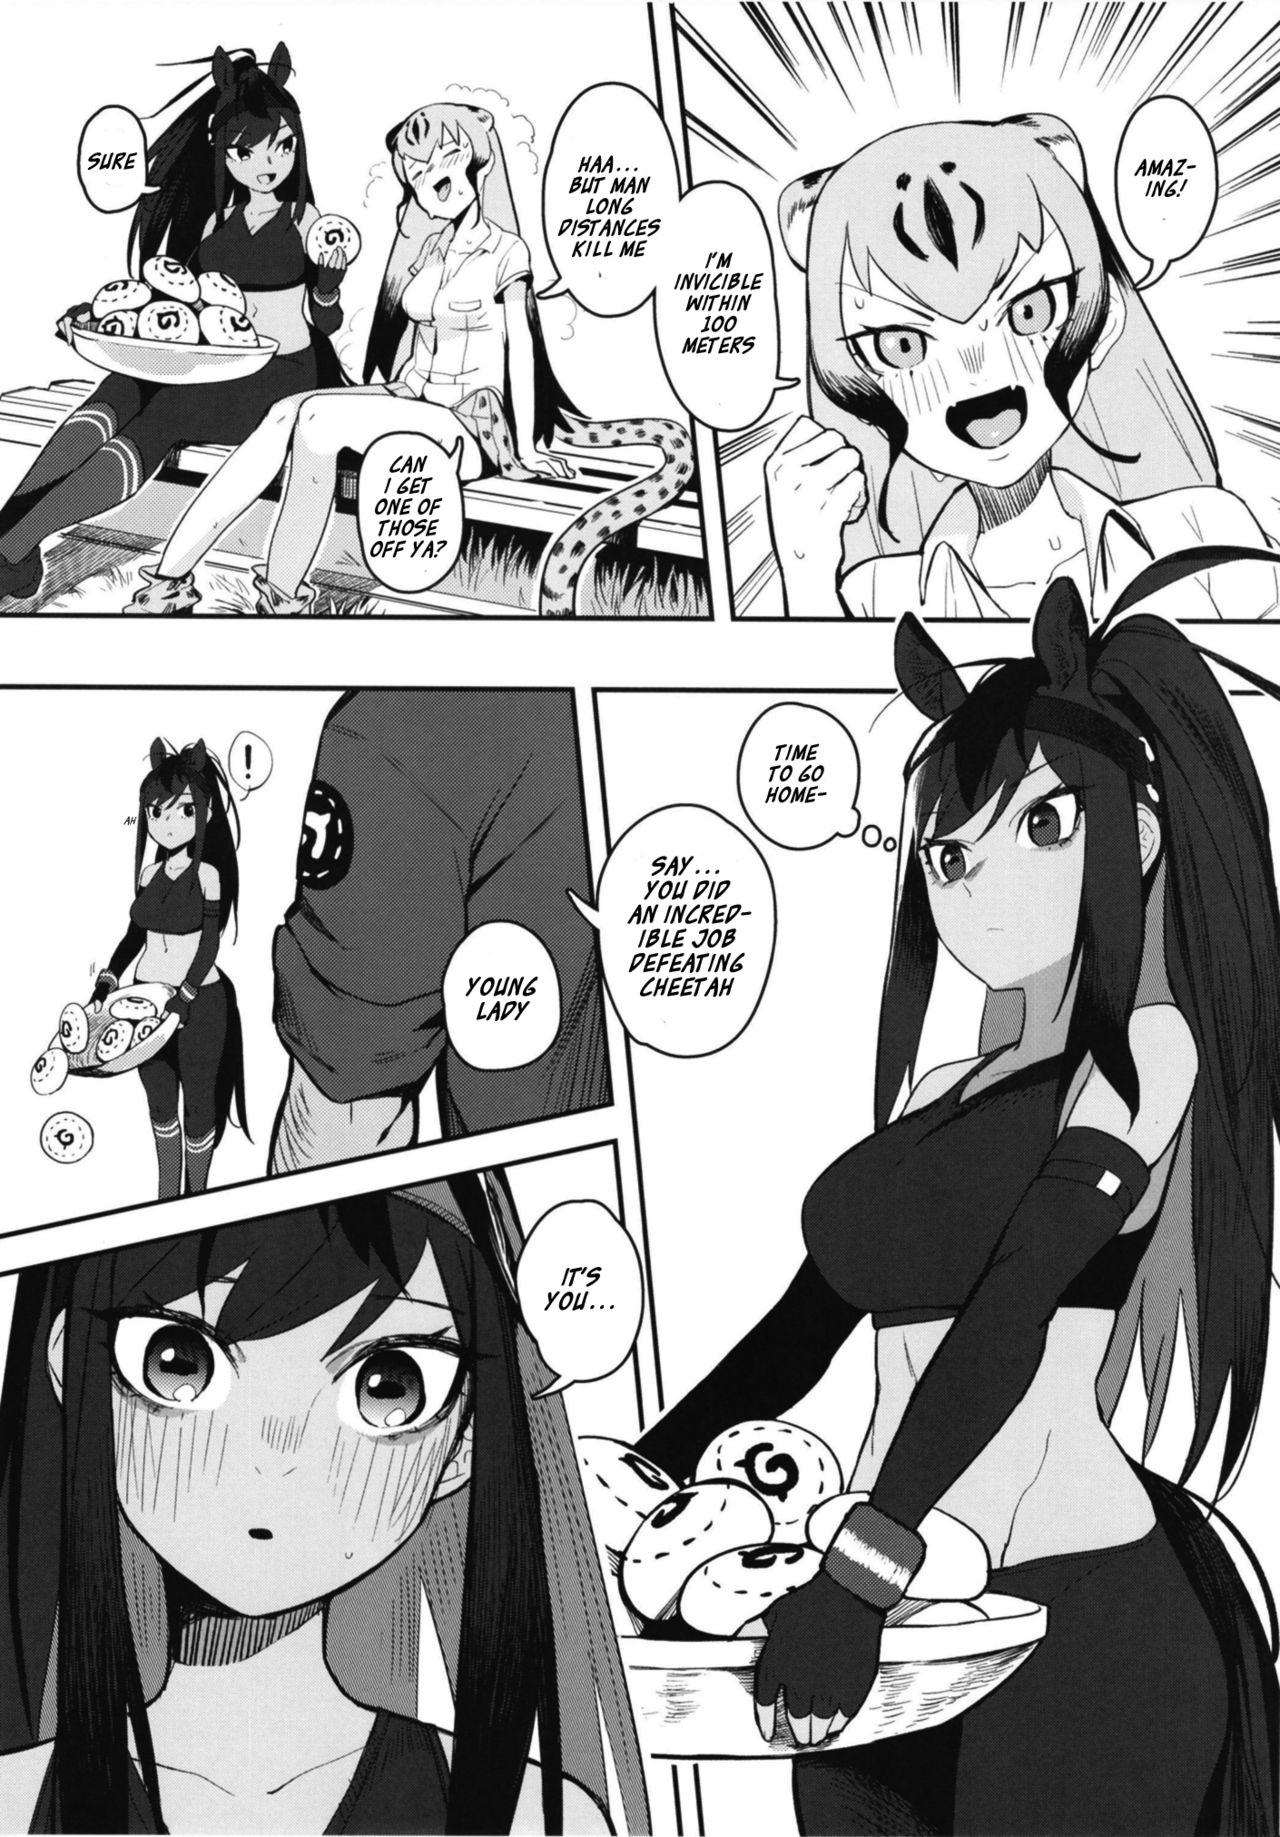 Free Blowjob Thoroughbred Early Days 2 - Kemono friends Best Blow Job - Page 7